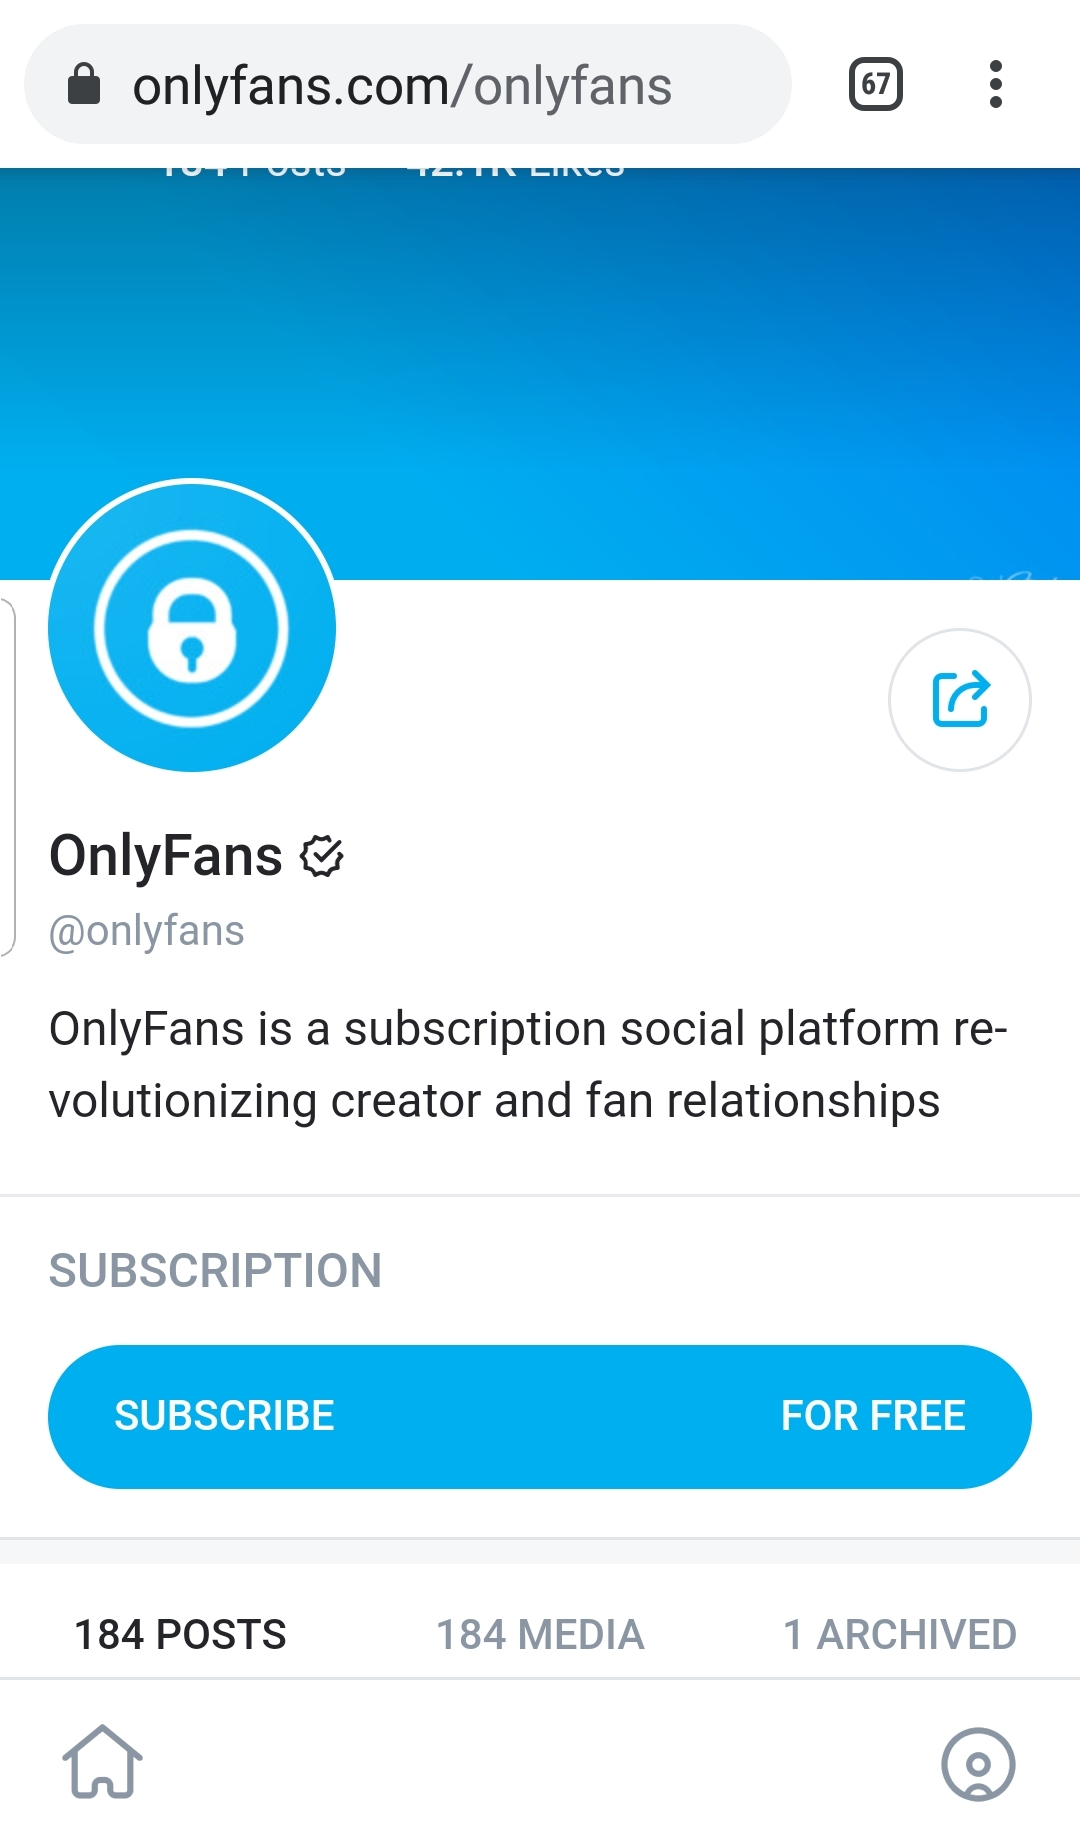 Only fans how to unsubscribe